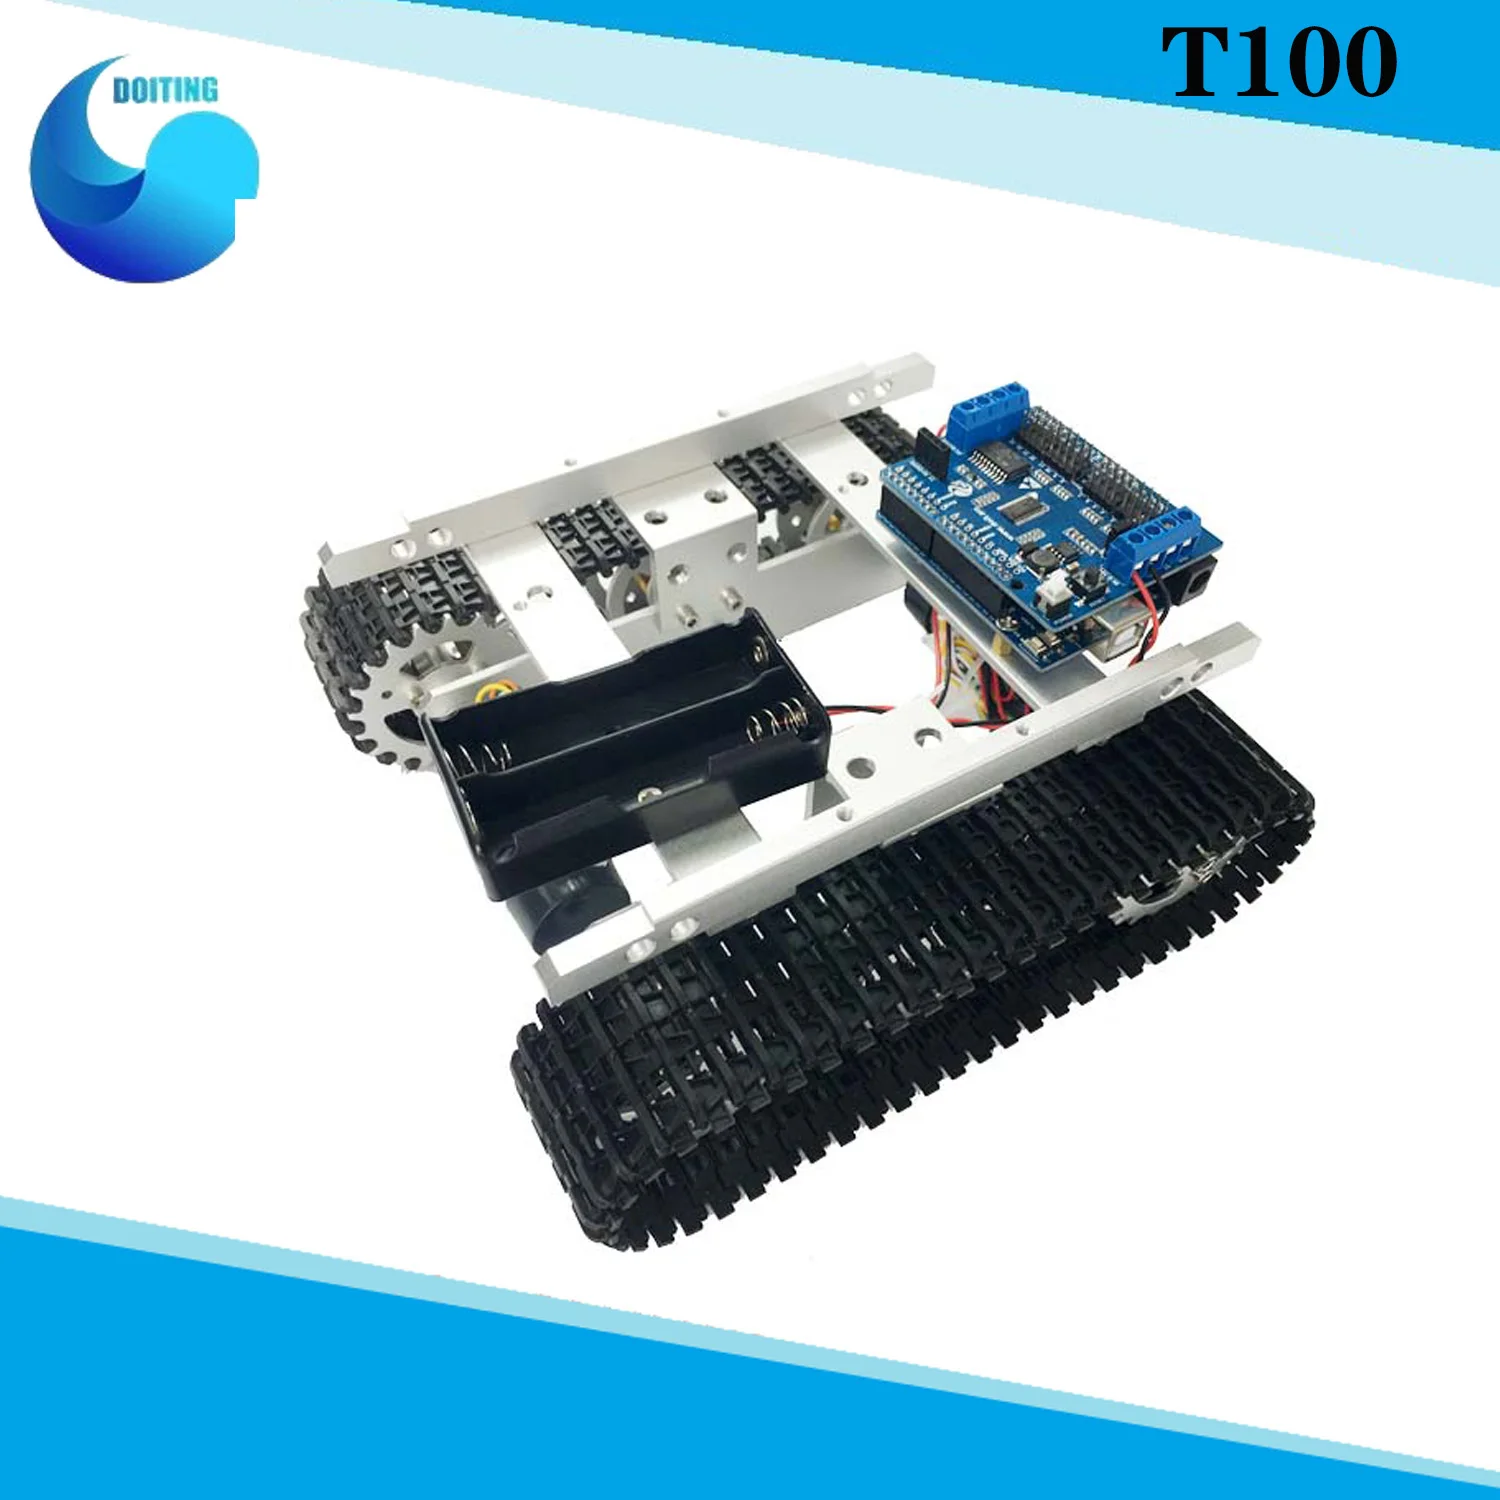 WiFi Smart Car RC T100 Full Metal Robot Tank  from NodeMCU Development Kit with L293D Motor Shield  Controlled by Phone APP